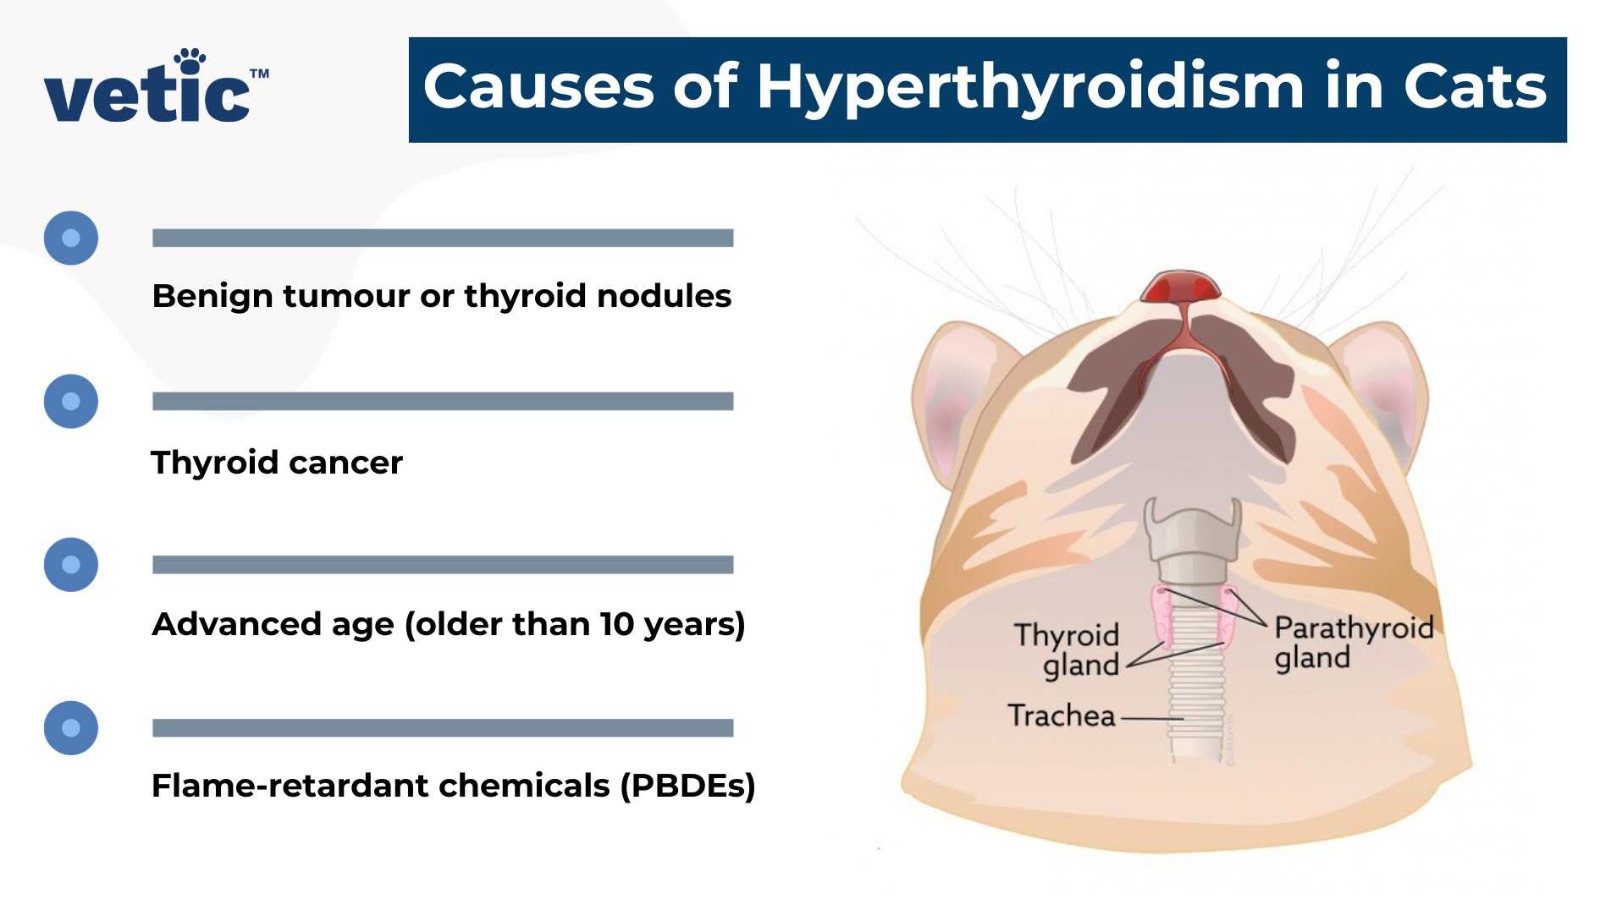 Infographic on the Causes of Hyperthyroidism in Cats. The causes of thyroid in cats include - Benign tumour or thyroid nodules Thyroid cancer Advanced age (older than 10 years) Flame-retardant chemicals (PBDEs)